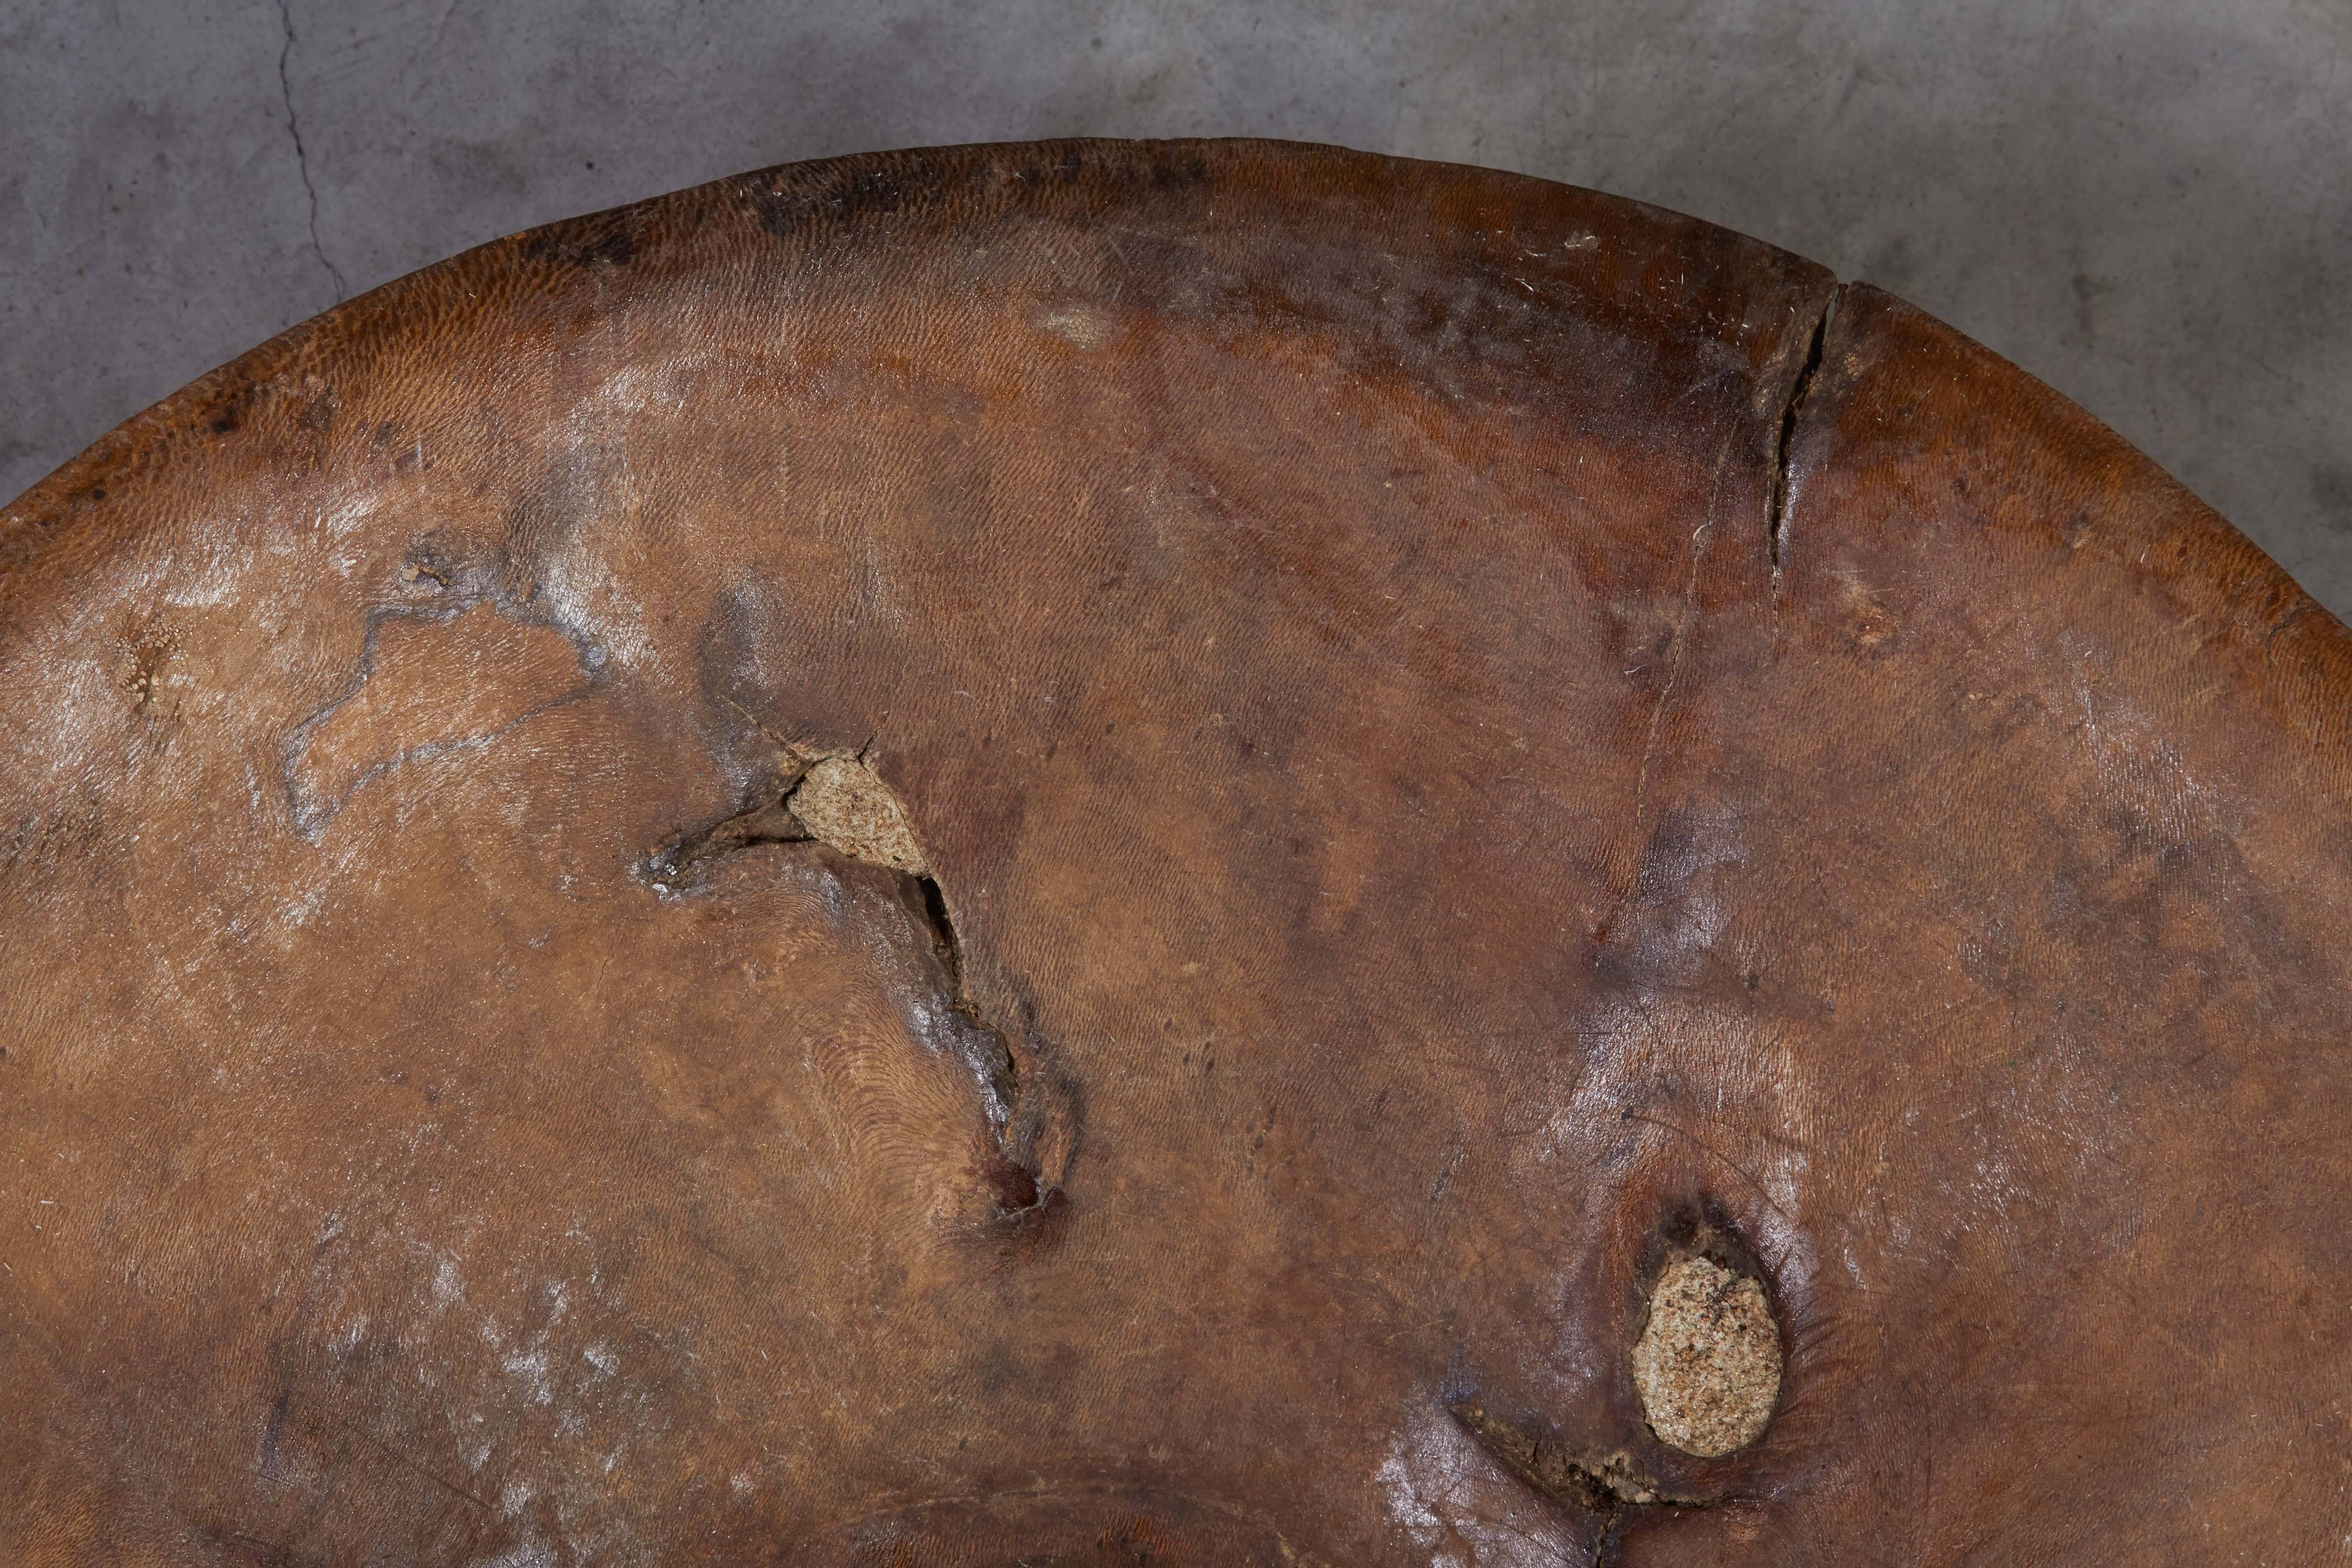 Large and Beautifully Worn Working Bowl with Great Patina 2